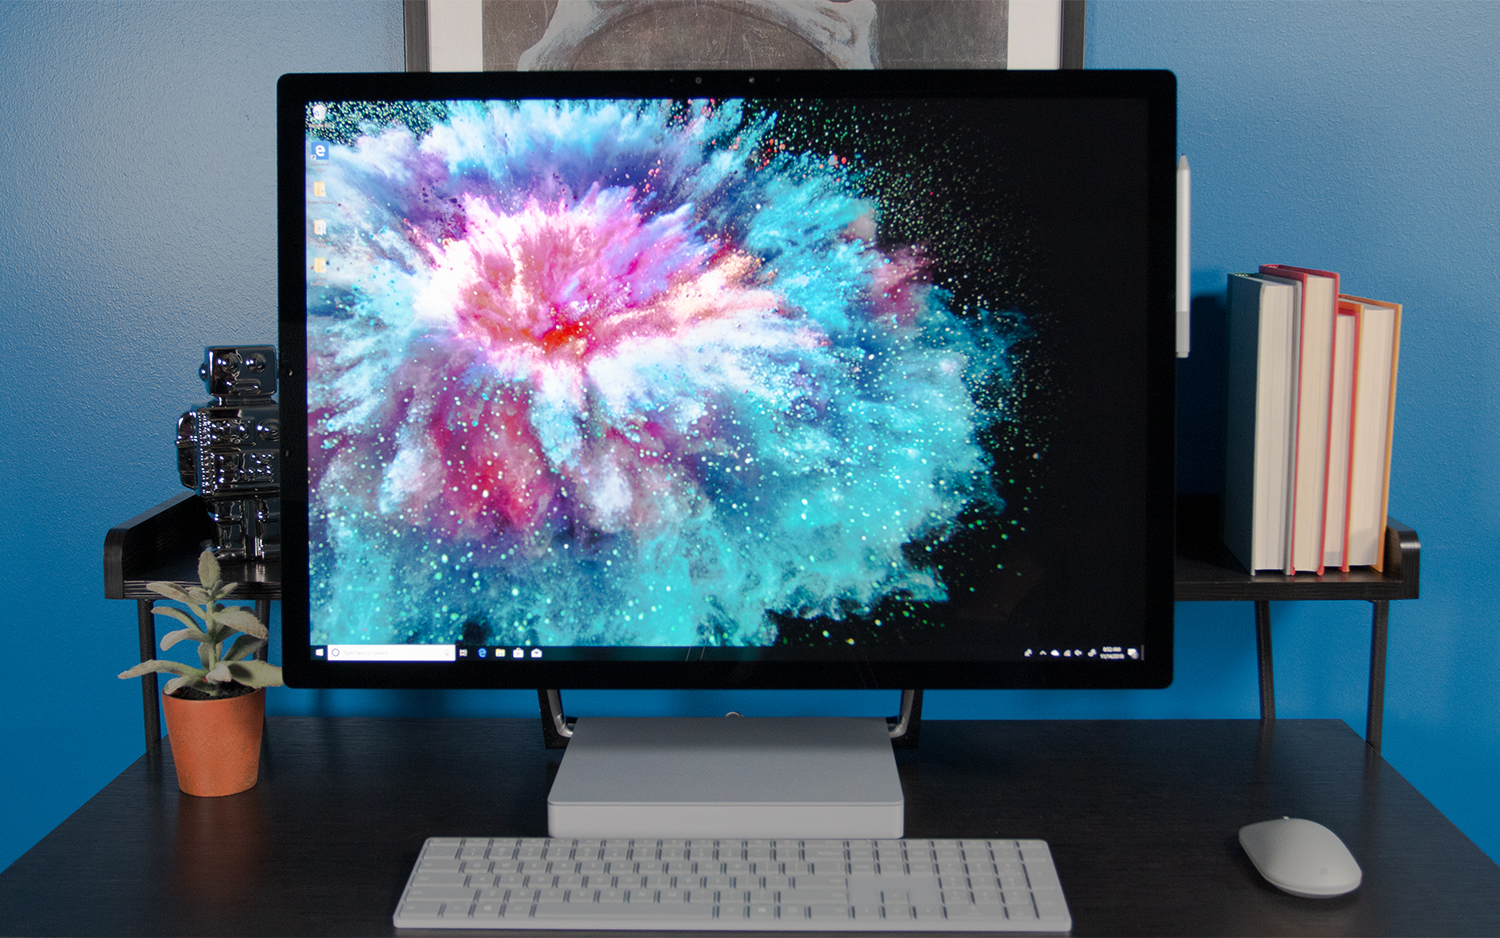 Microsoft Surface Studio 2 - Full Review and Benchmarks | Tom's Guide